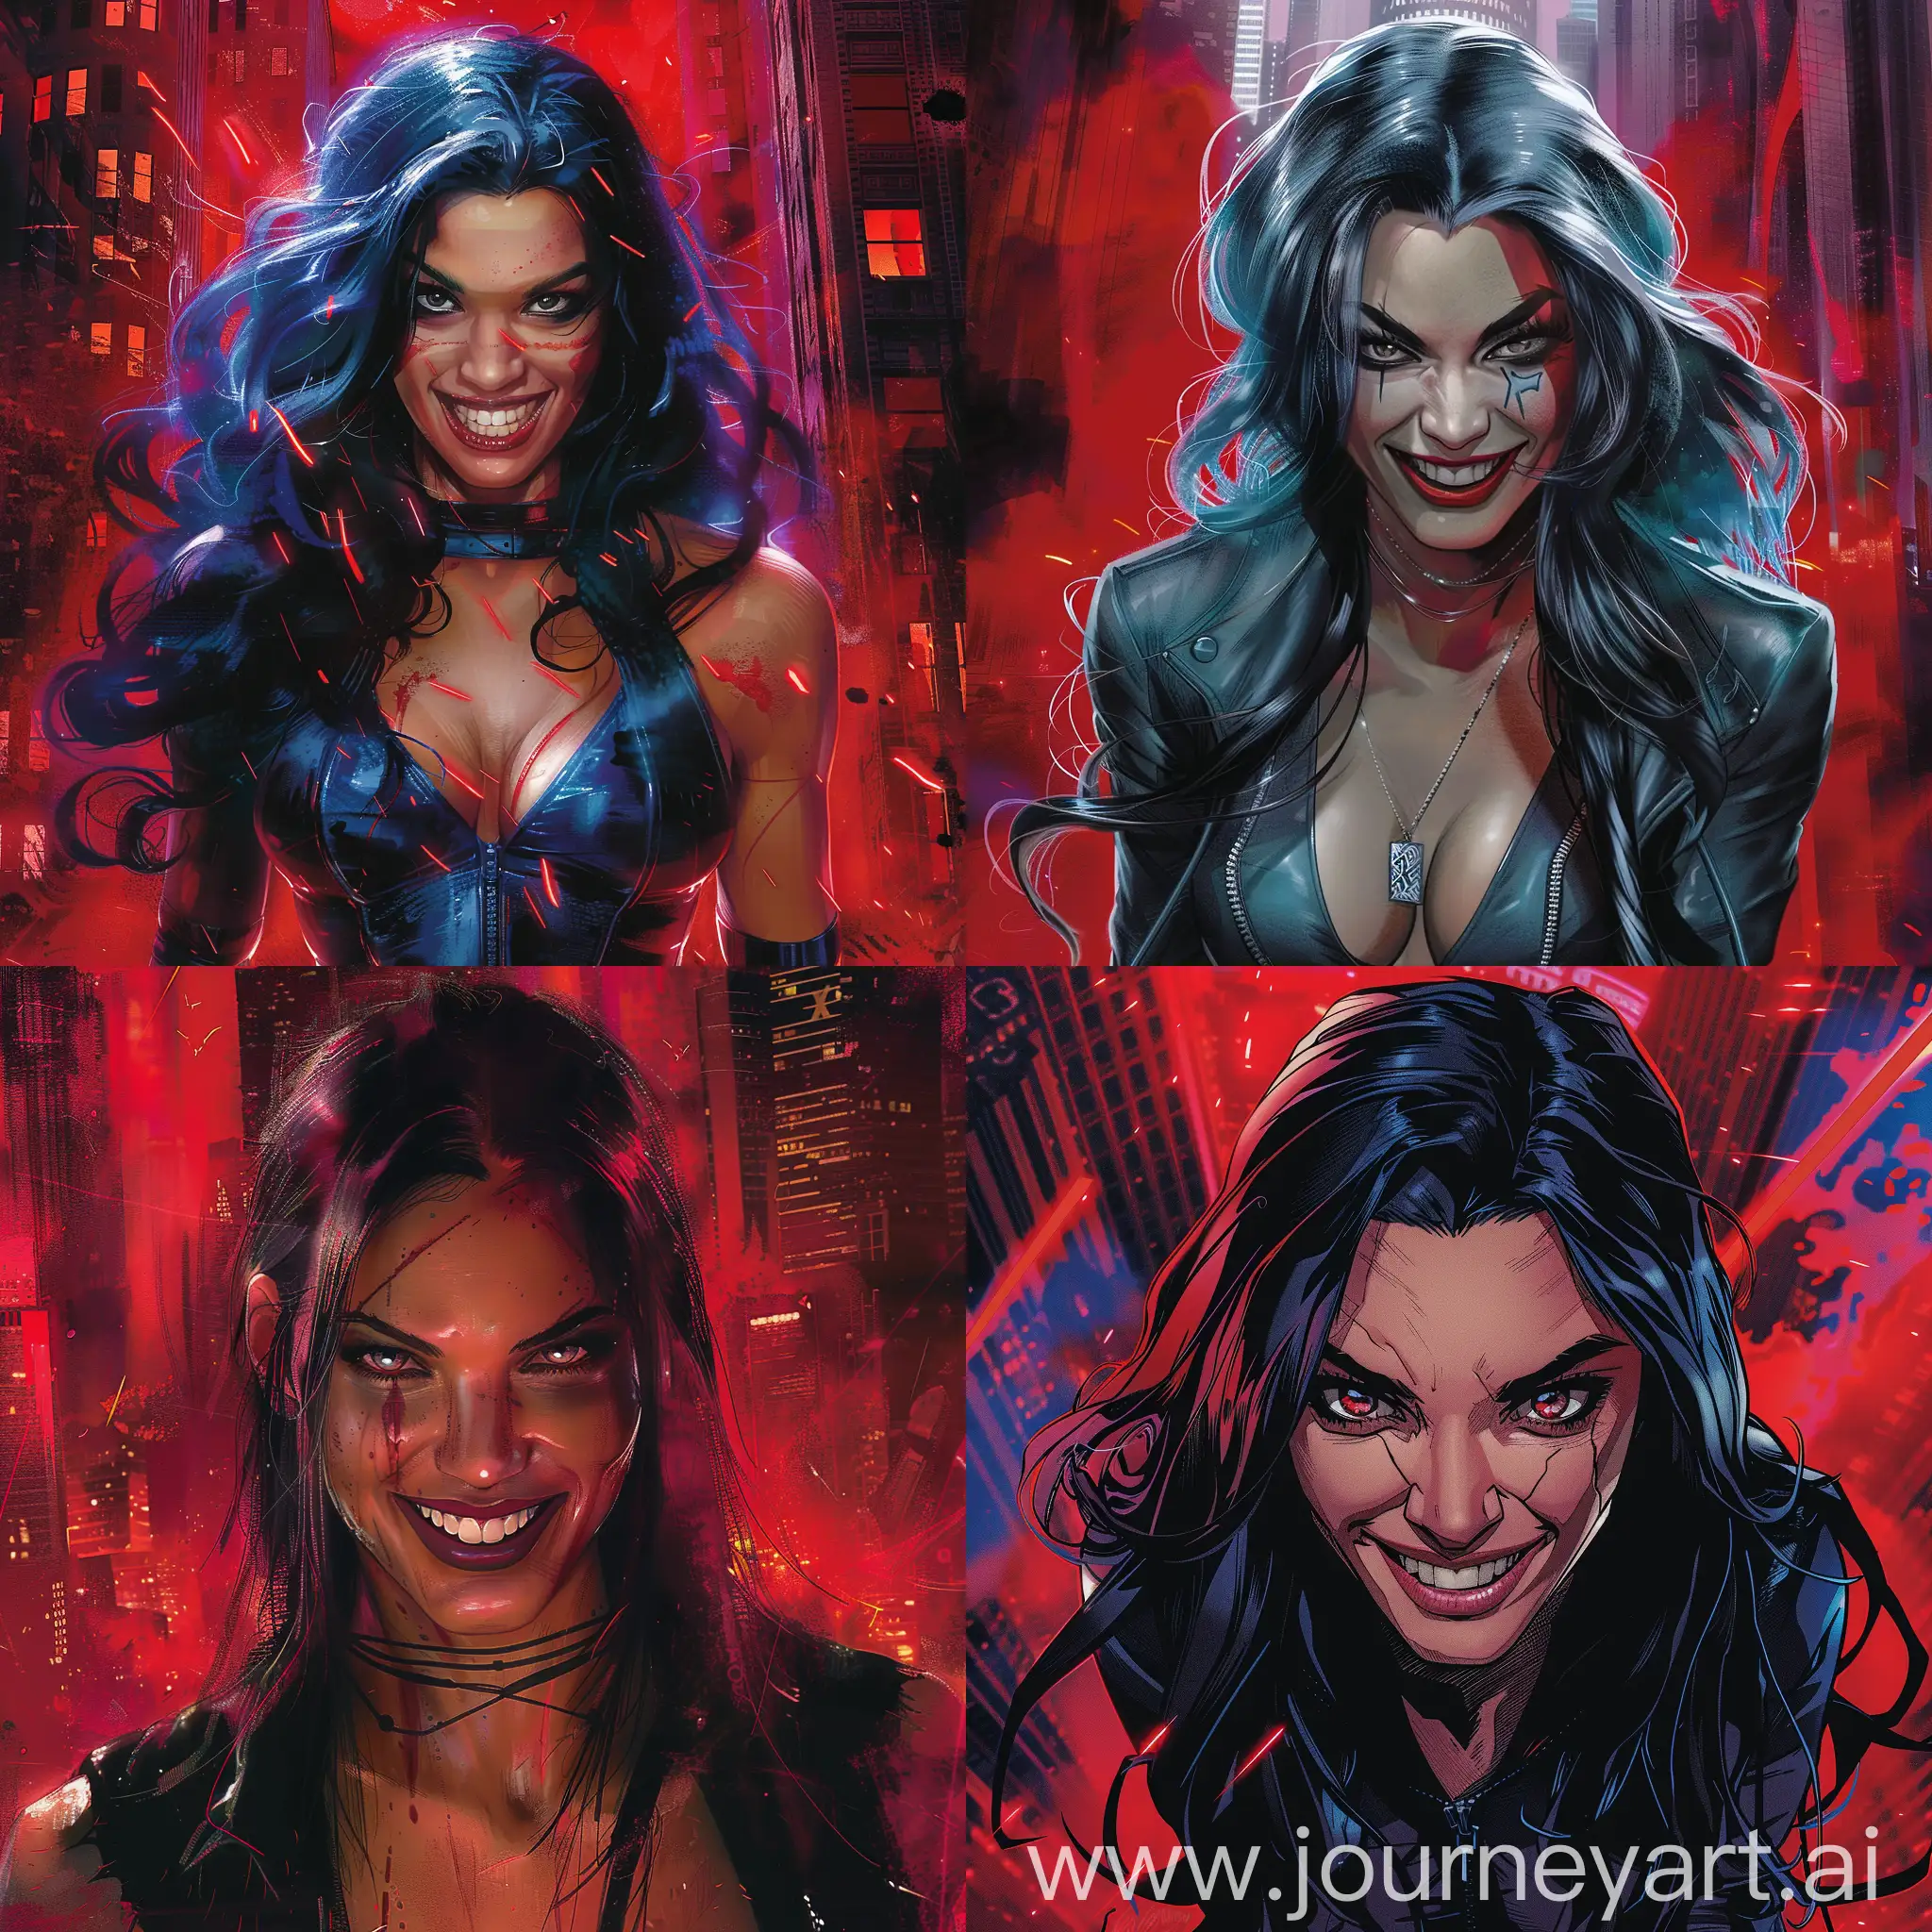 Cunning-Domino-of-XMen-in-Red-Cityscape